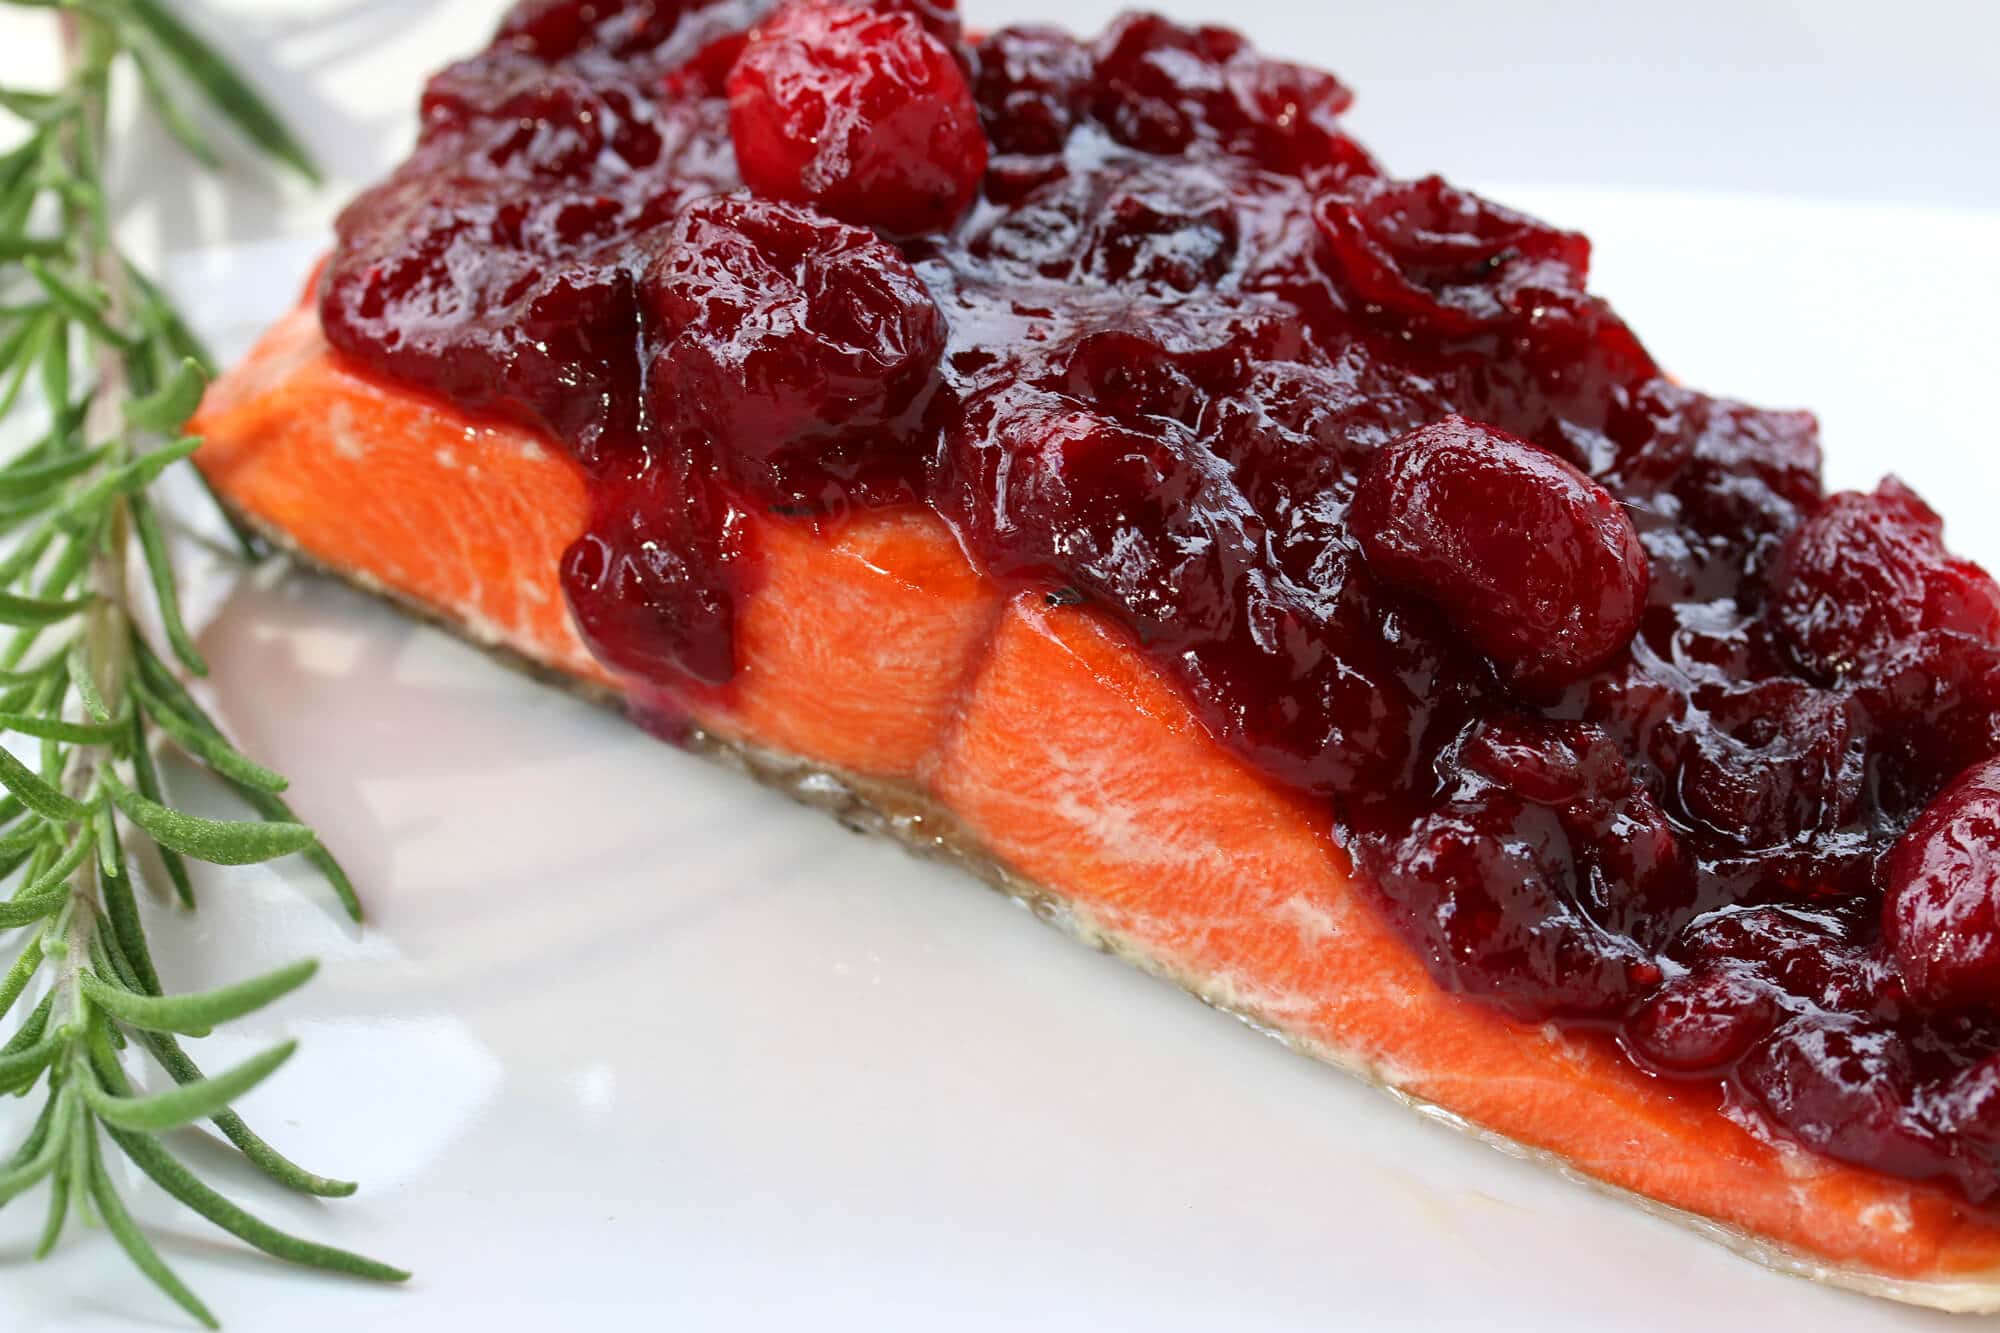 salmon recipe cranberry sauce mustard dijon herbs ginger christmas holidays thanksgiving recipe easy fast sous vide baked grilled broiled pan fried